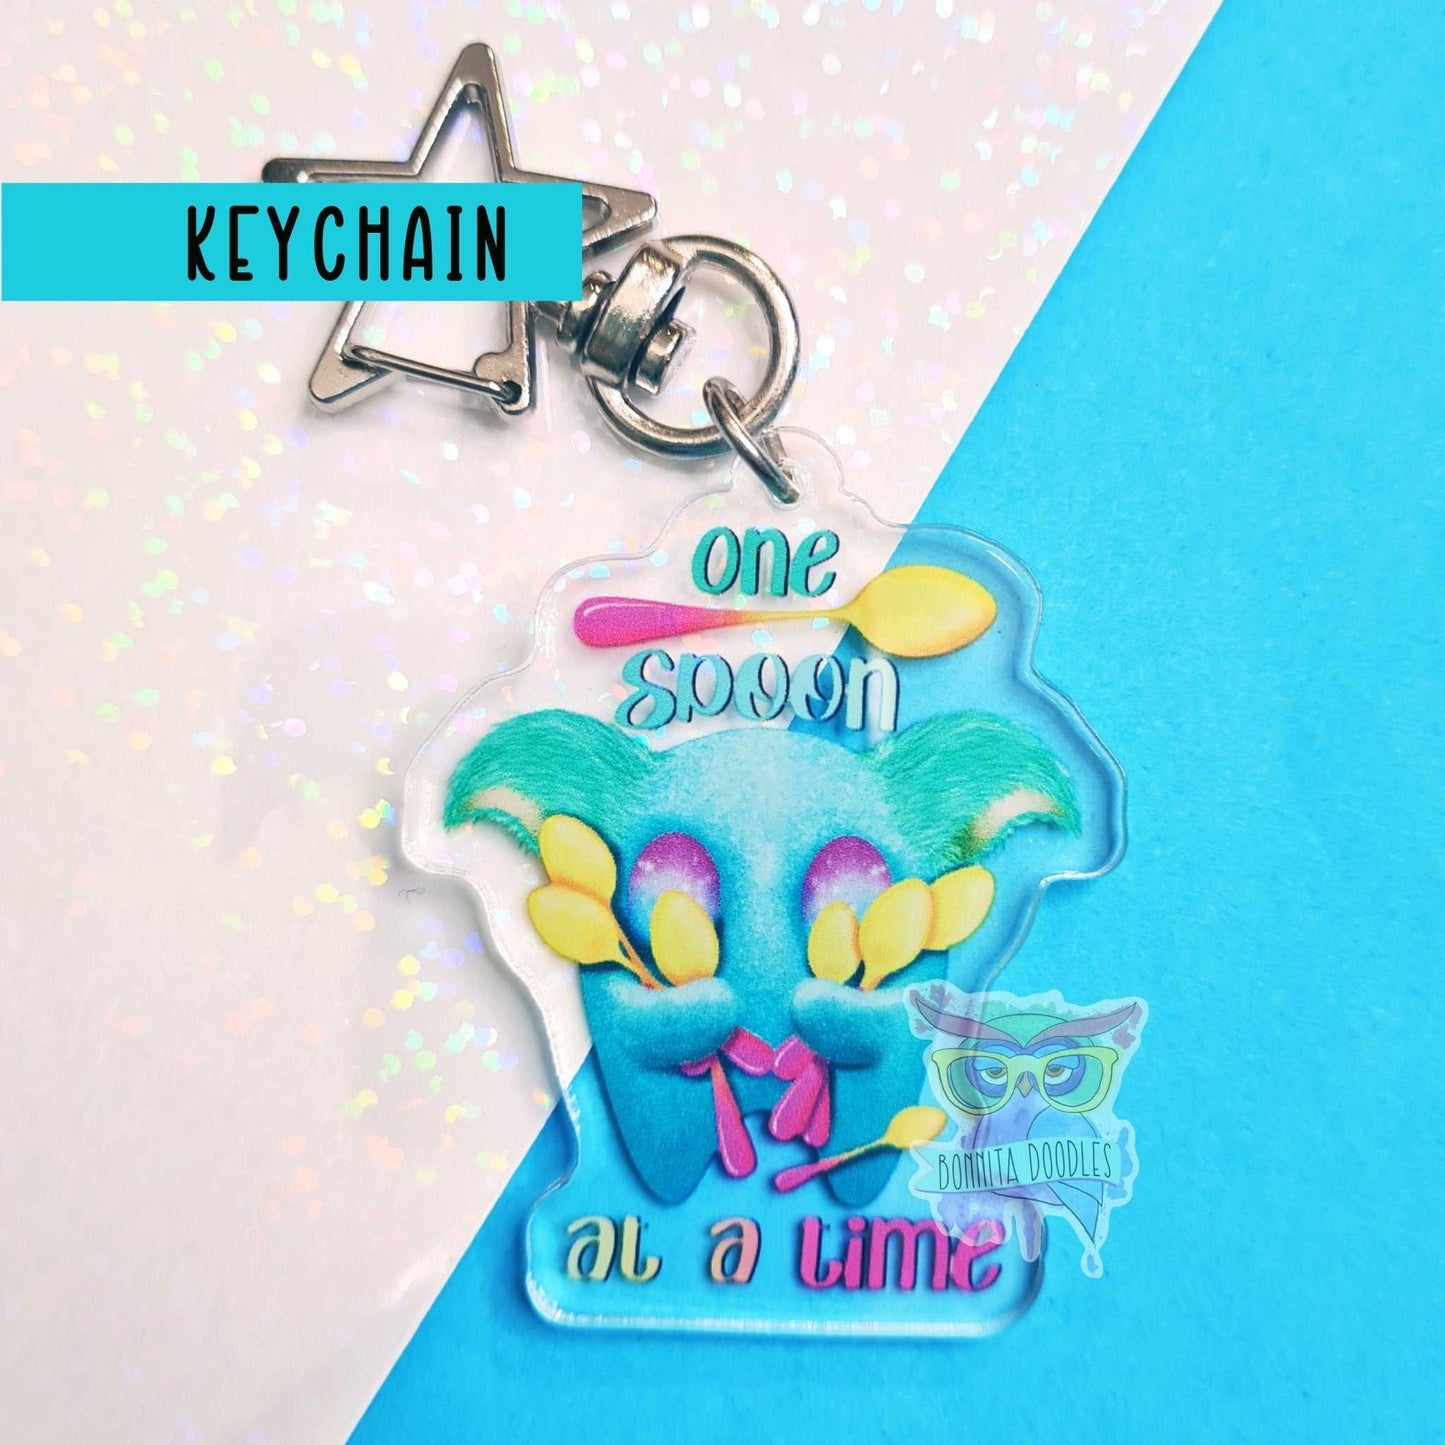 Chronic illness, one spoon at a time spoonies keychain